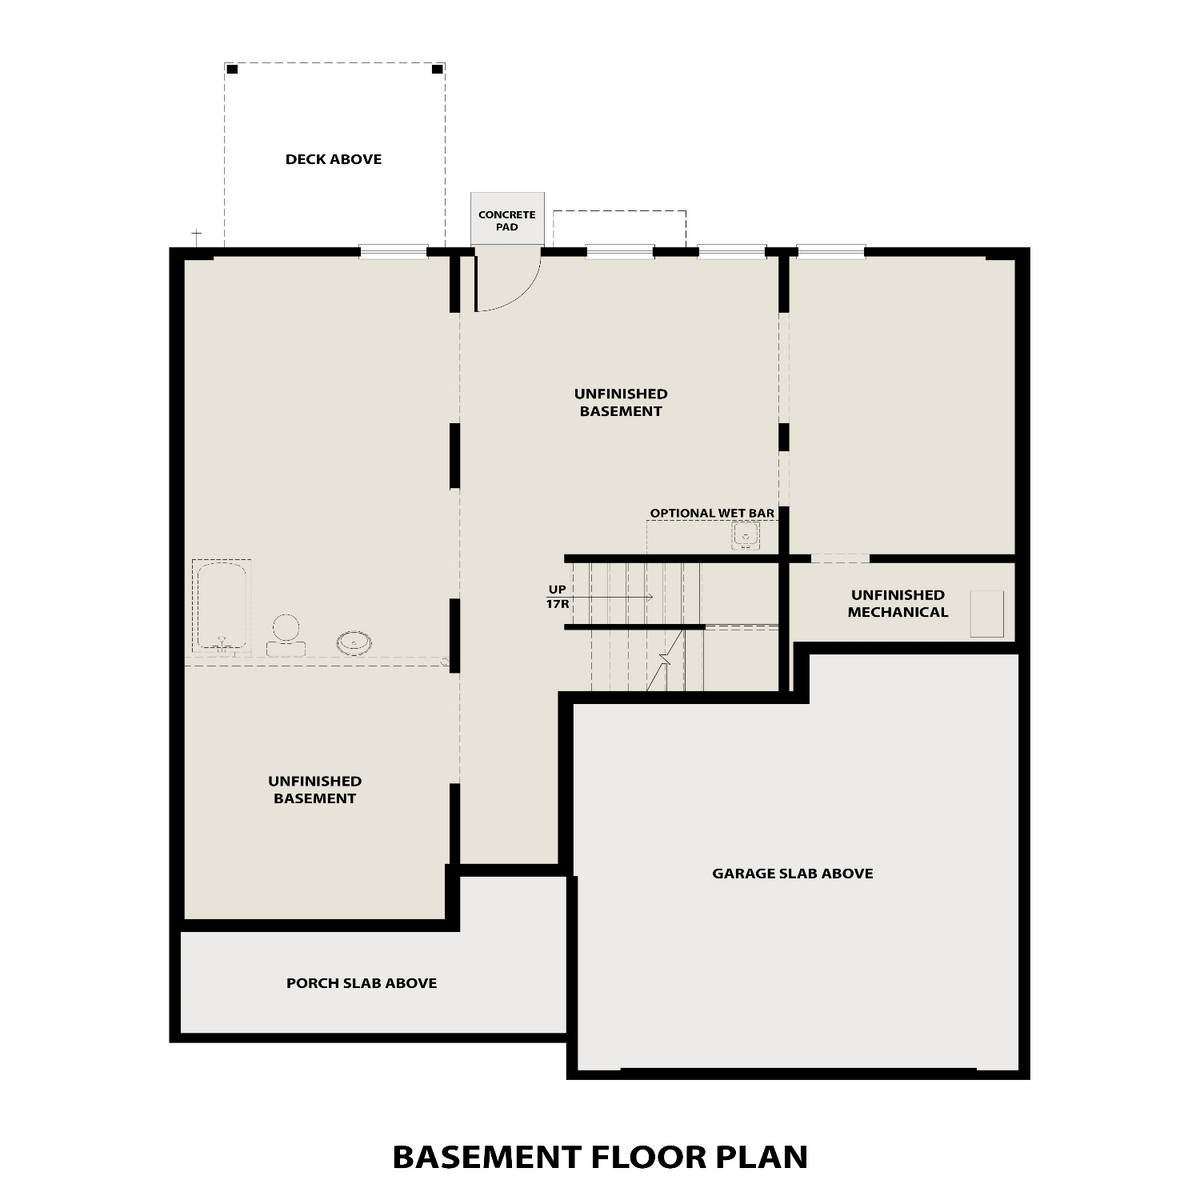 3 - The Willow D- Unfinished Basement  floor plan layout for 101 Honeydew Lane in Davidson Homes' Riverwood community.